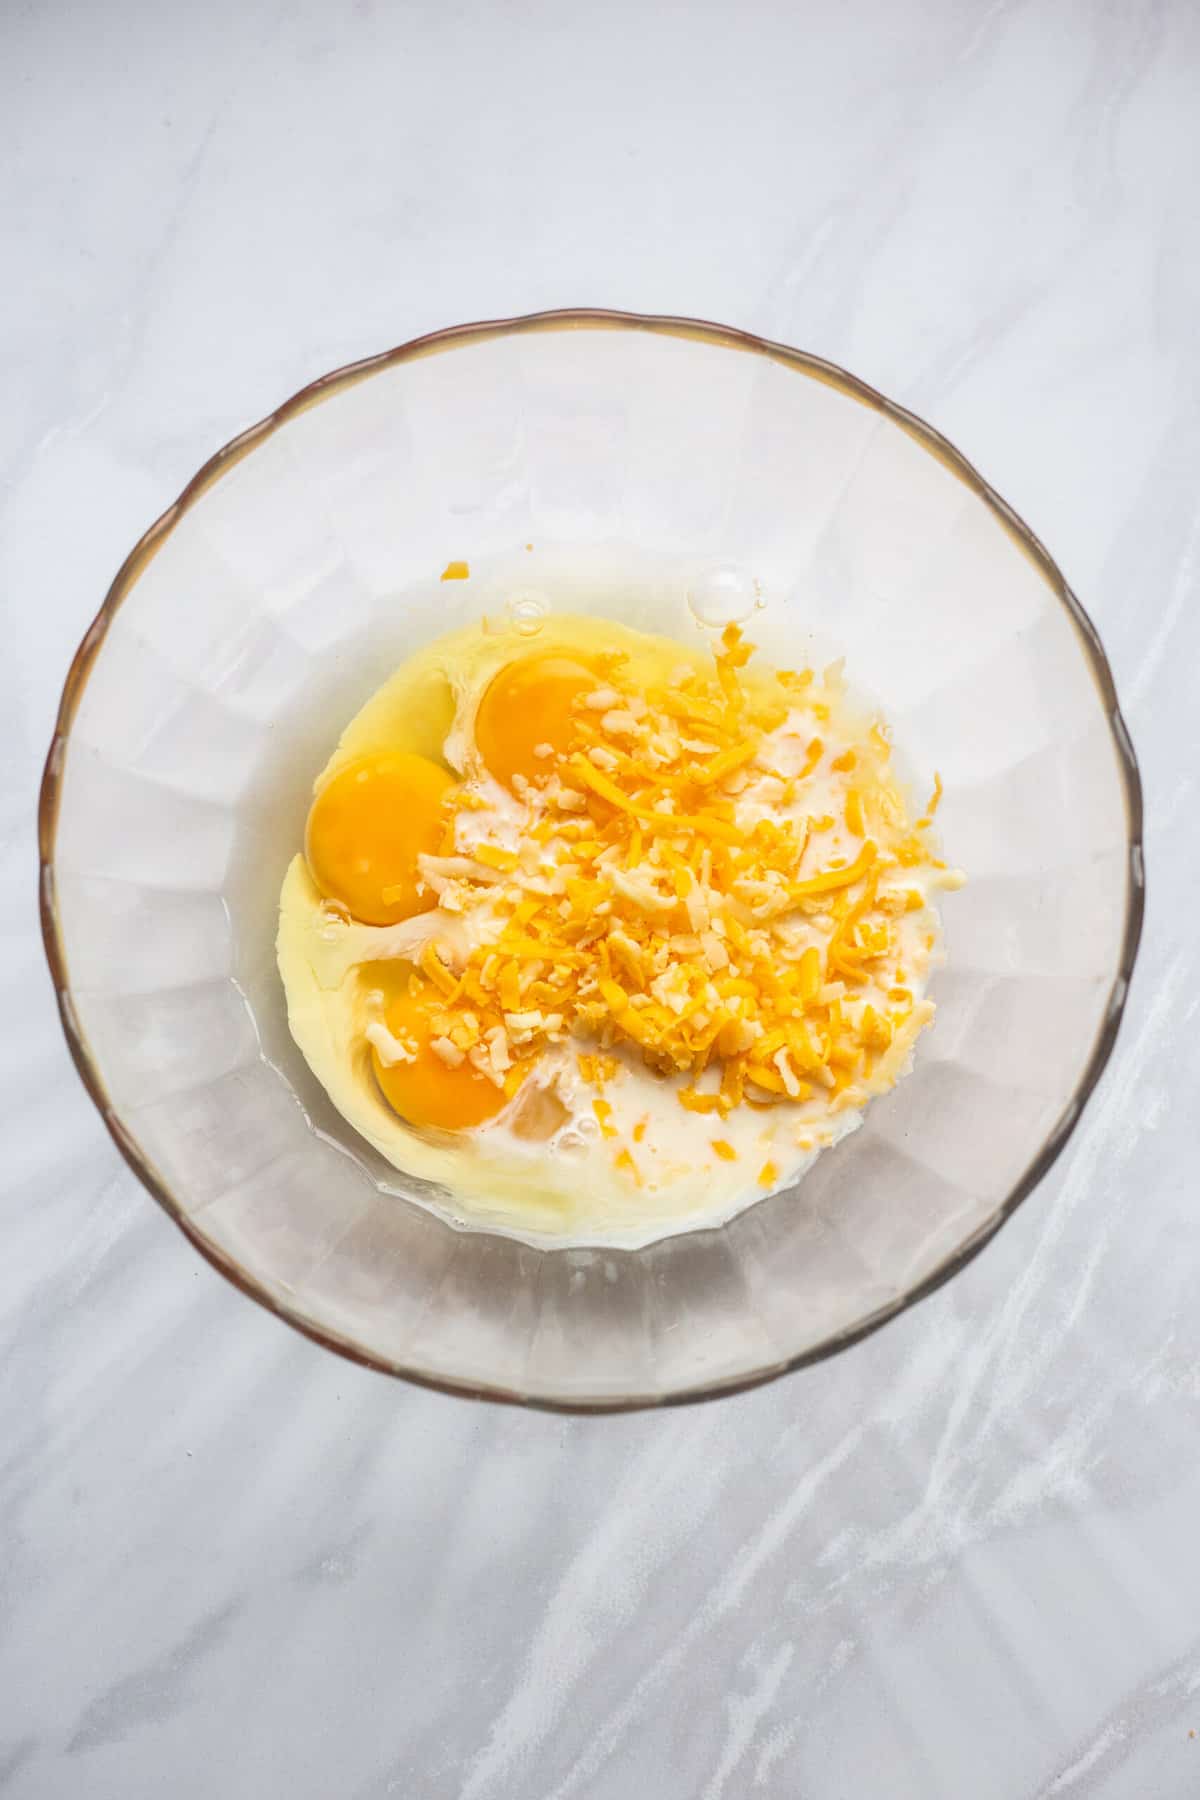 large glass bowl of whole eggs and shredded cheese